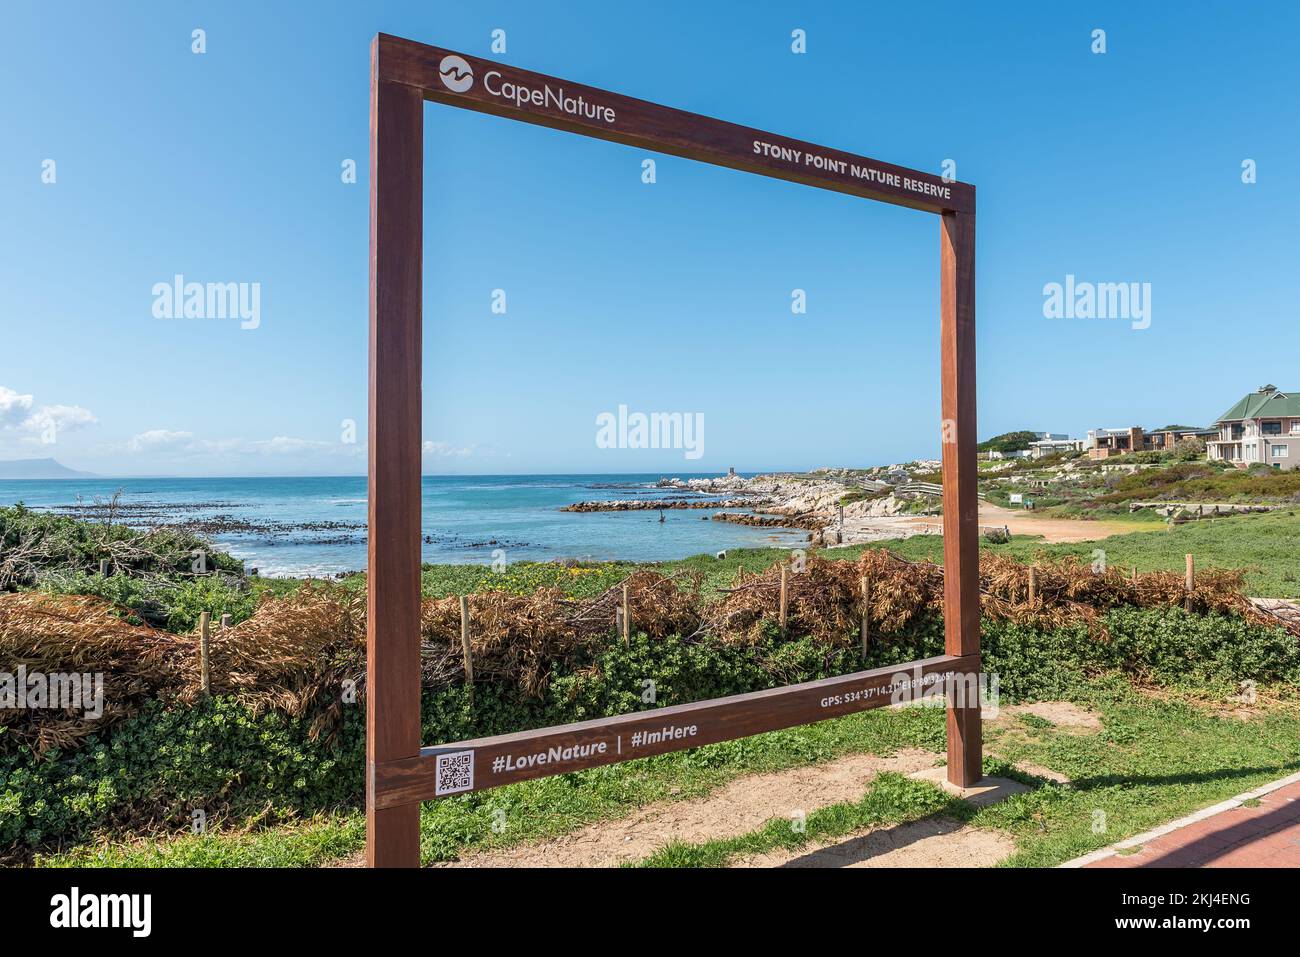 Bettys Bay, South Africa - Sep 20, 2022: Stony Point Nature Reserve in Bettys Bay is visible through a giant selfie frame Stock Photo